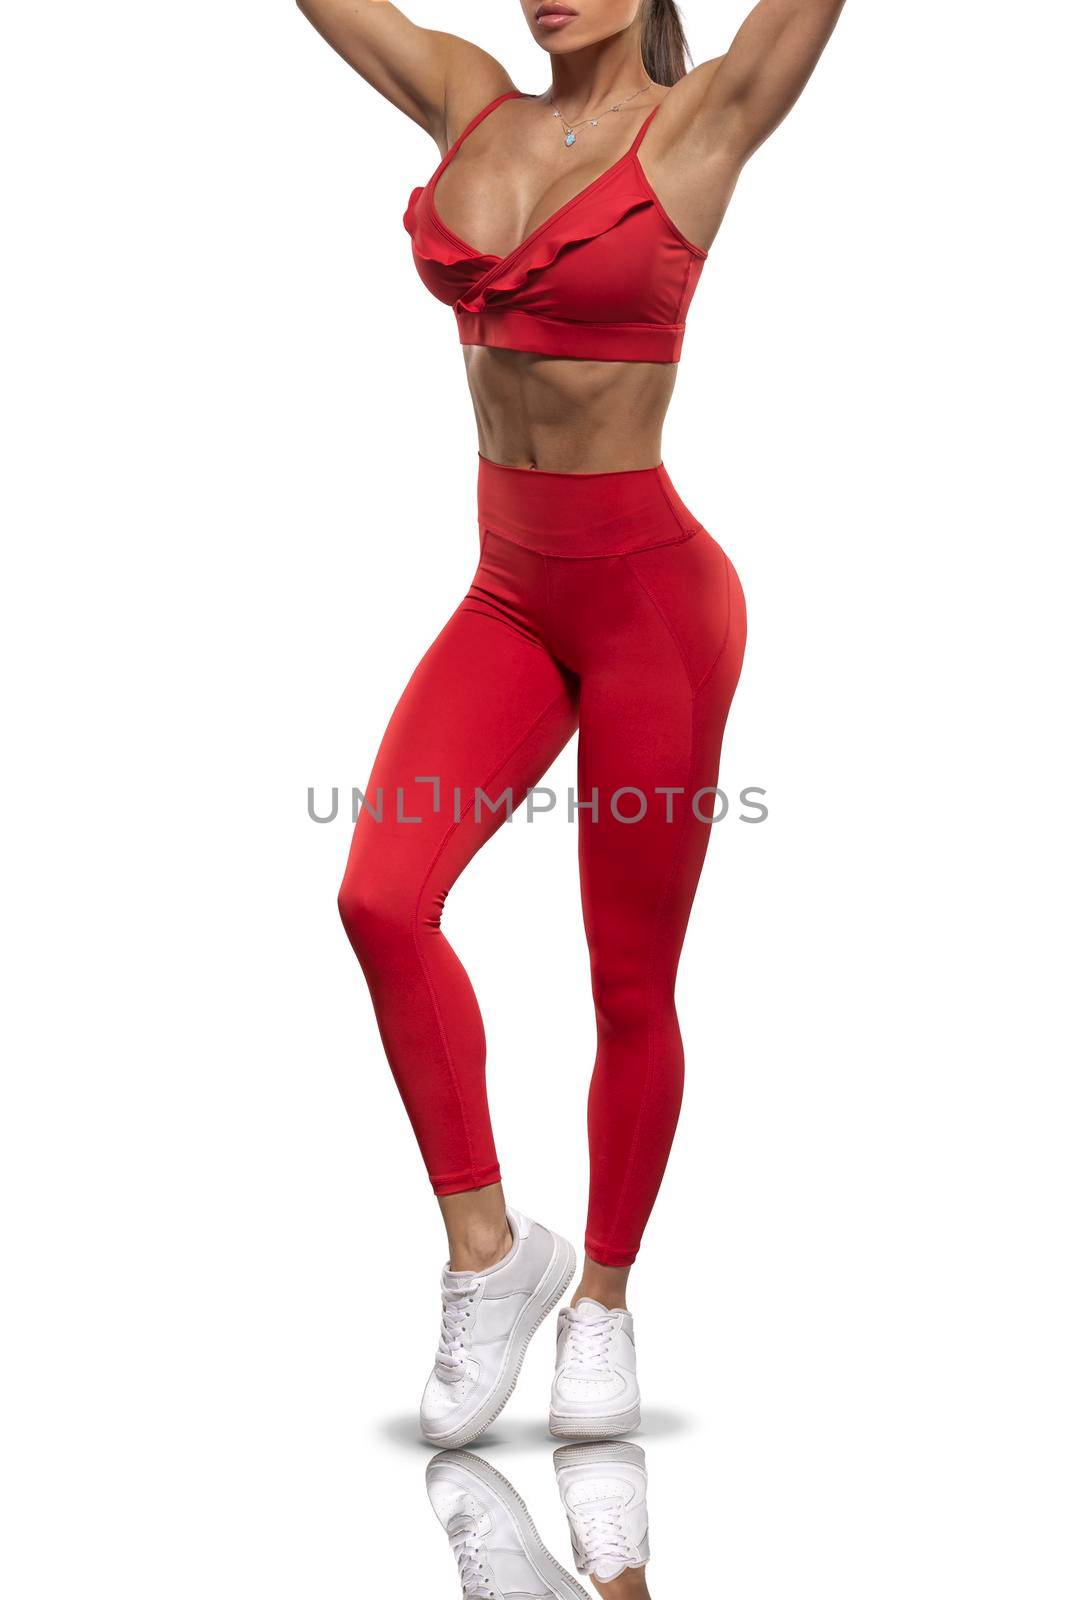 legs girl in red leggings and a top on a white background by but_photo